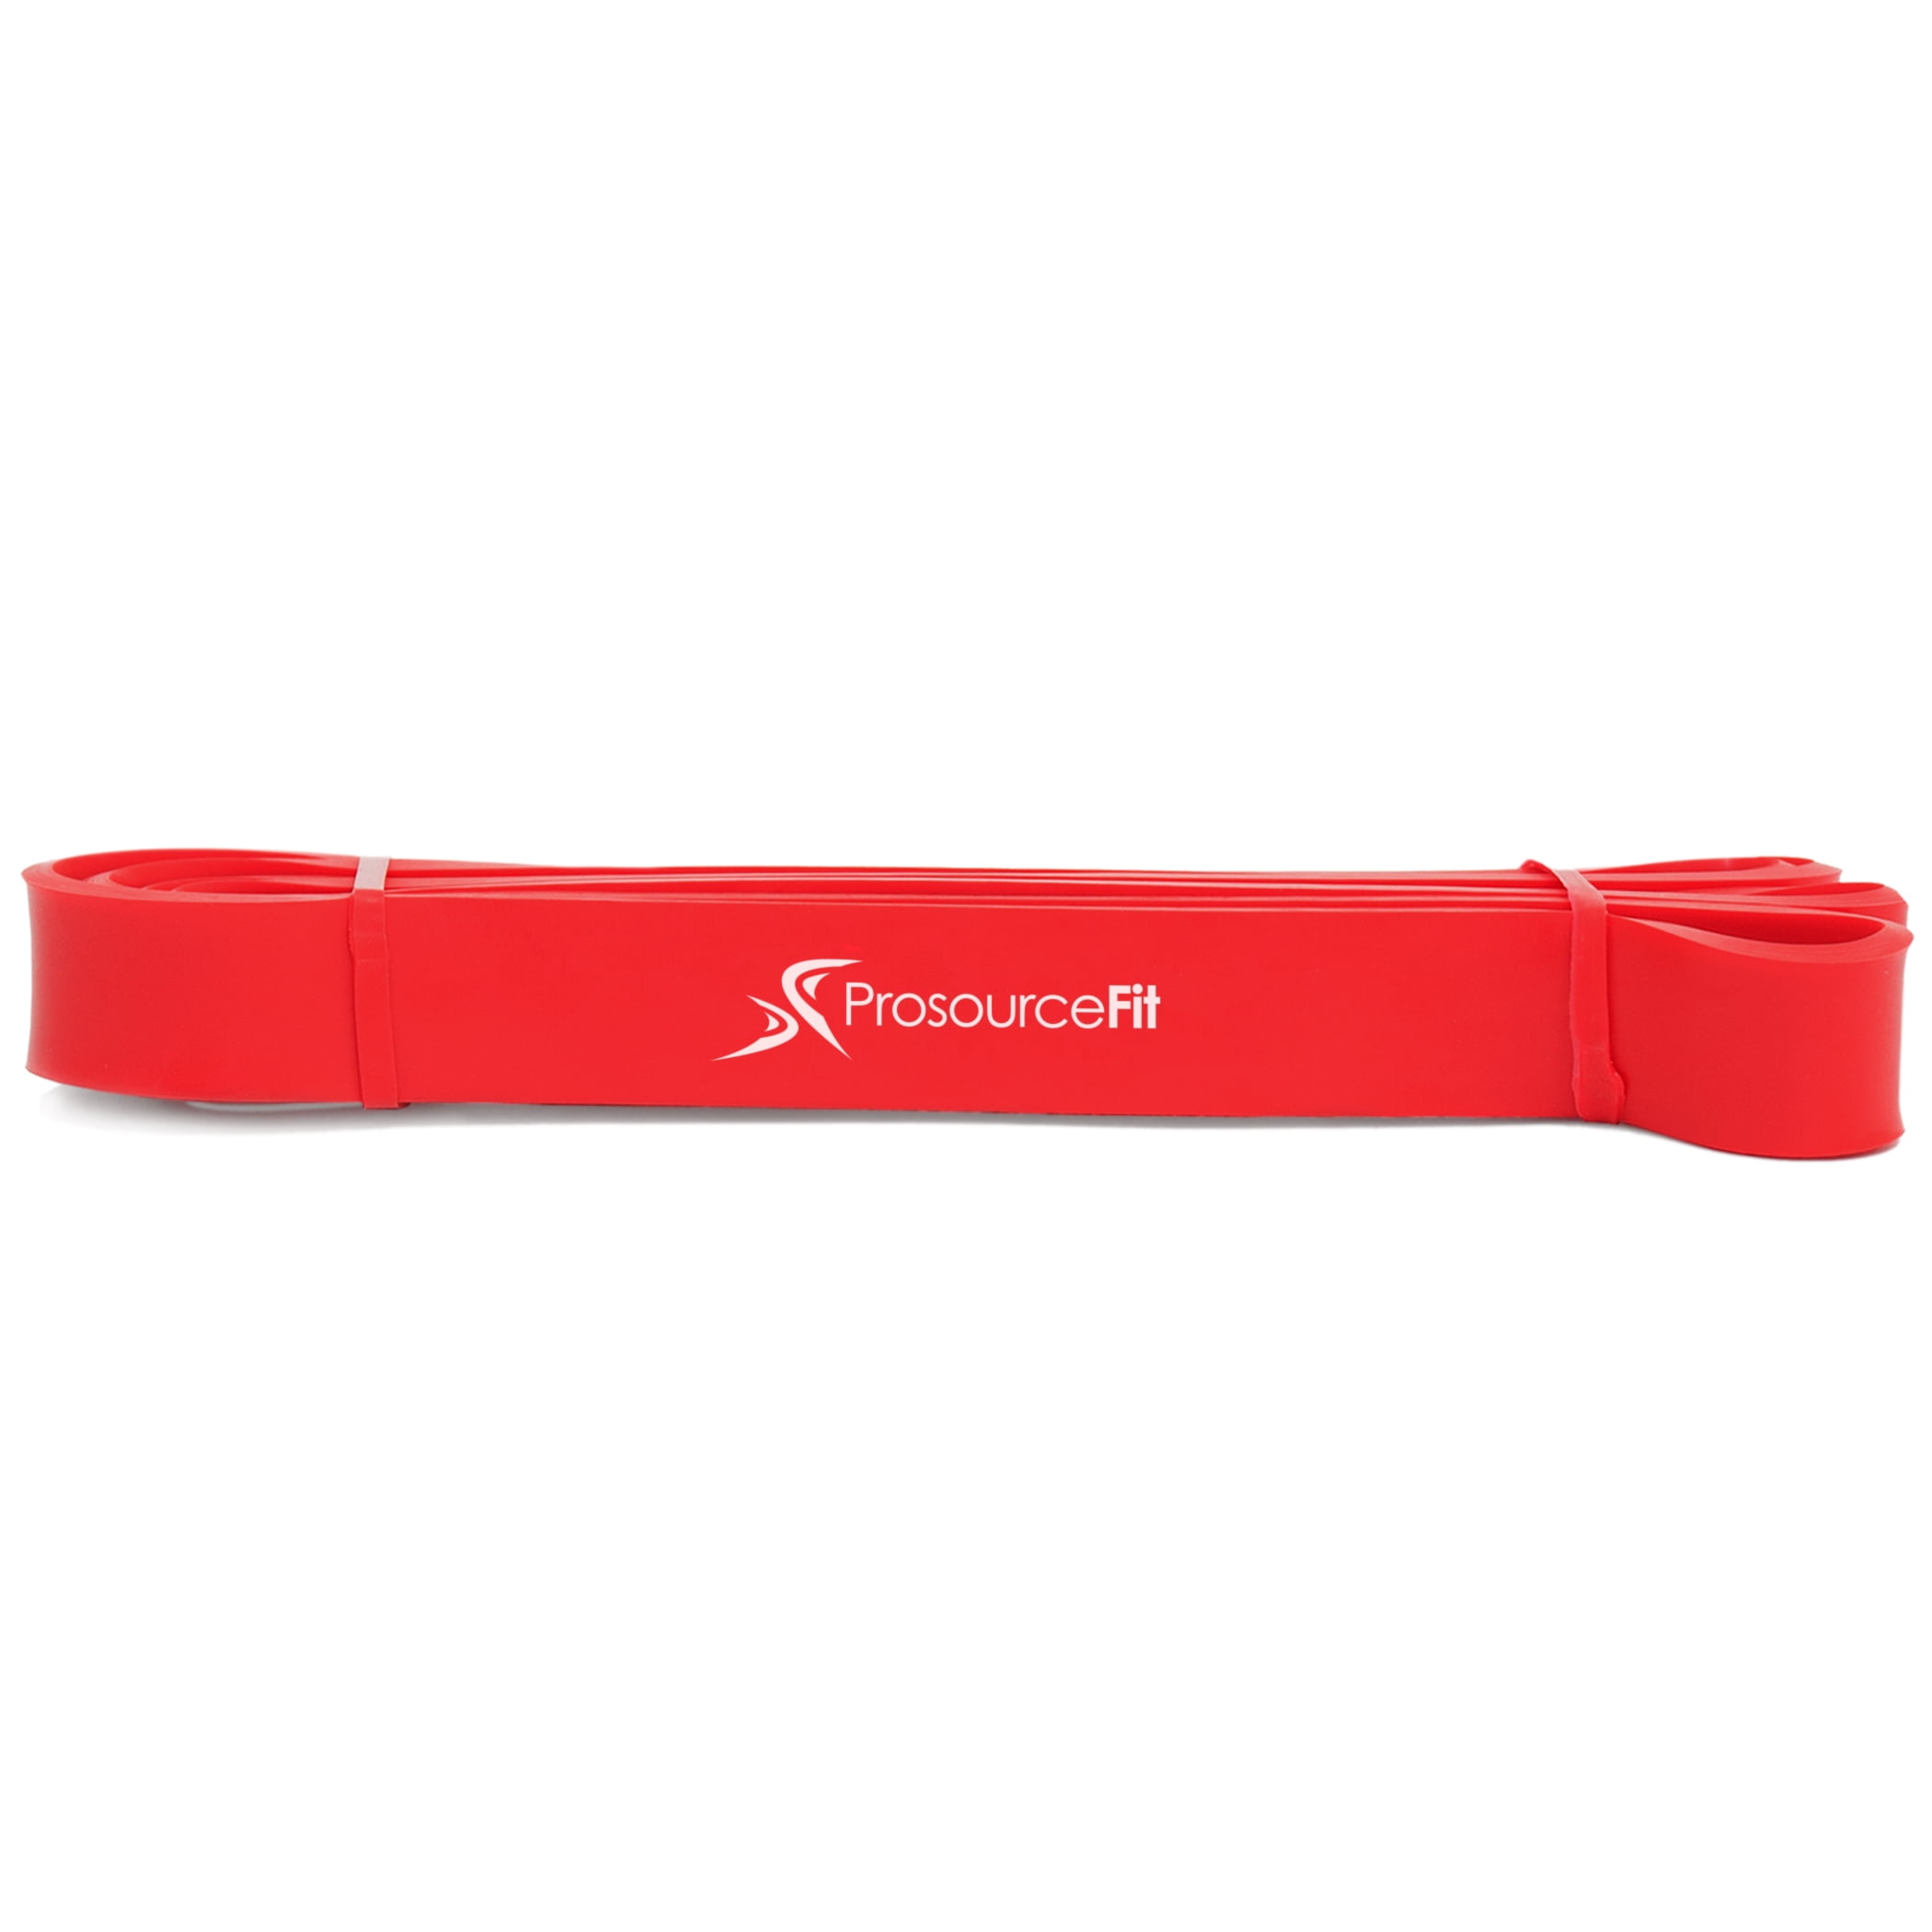 Originalsourcing 5 Size Resistance Loop Bands & Exercise Core